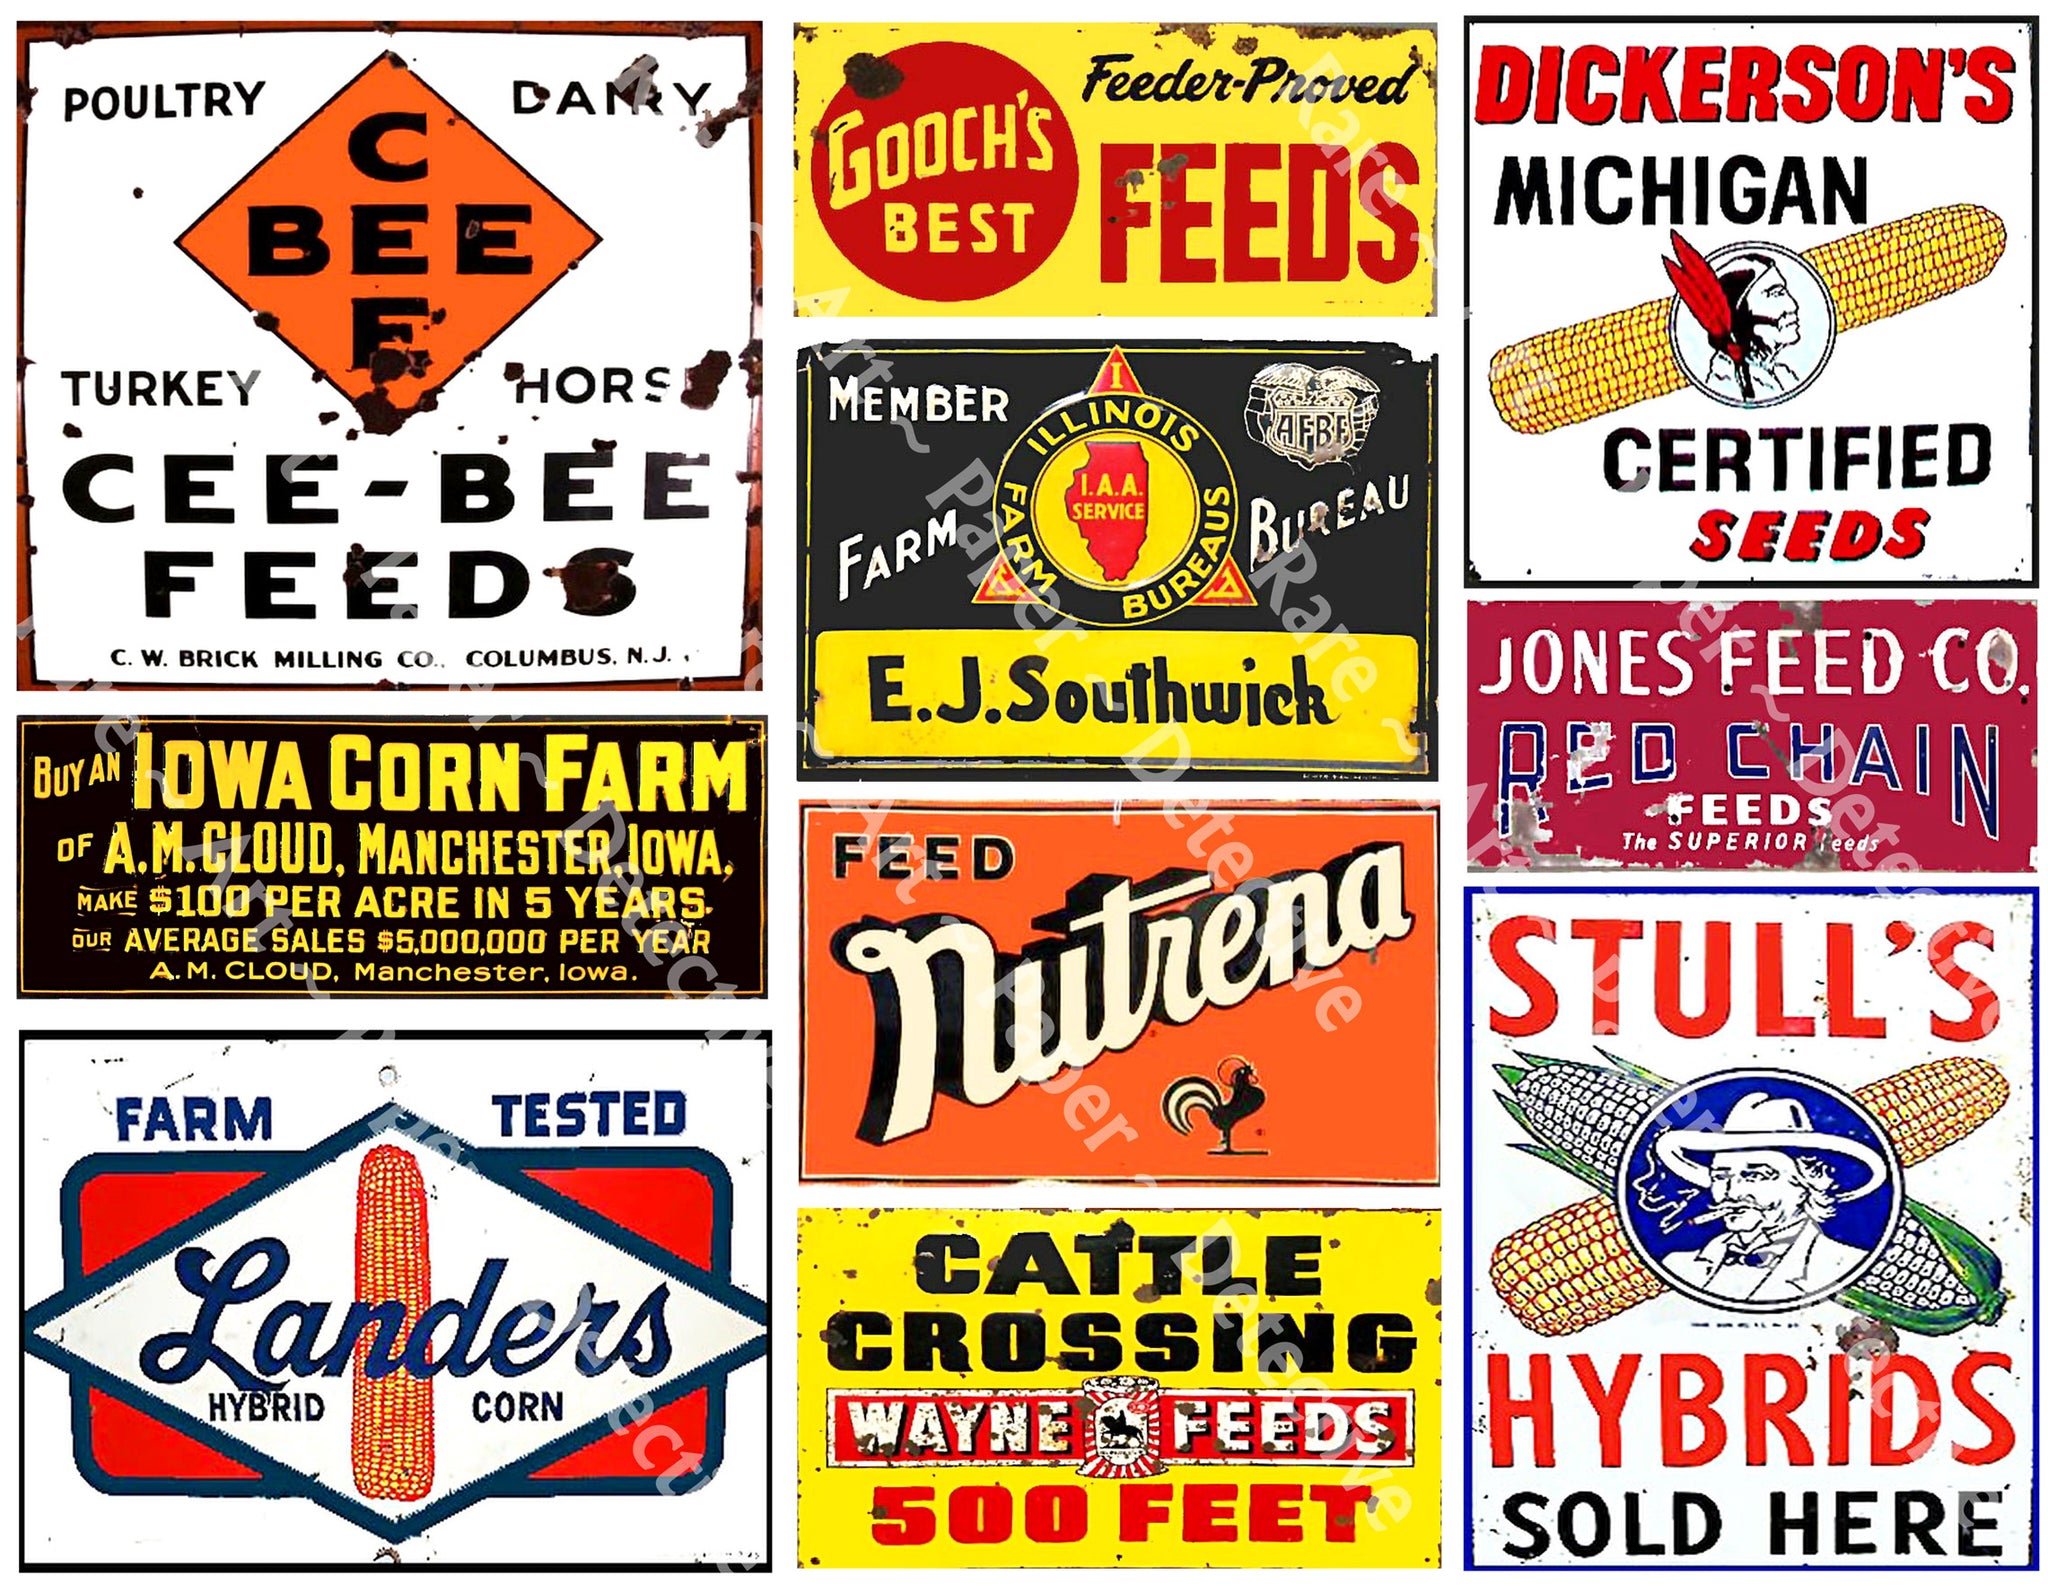 Antique Style Advertising Signs, General Store Sign Stickers Featuring a Vintage Rusty Look, Sheet #499